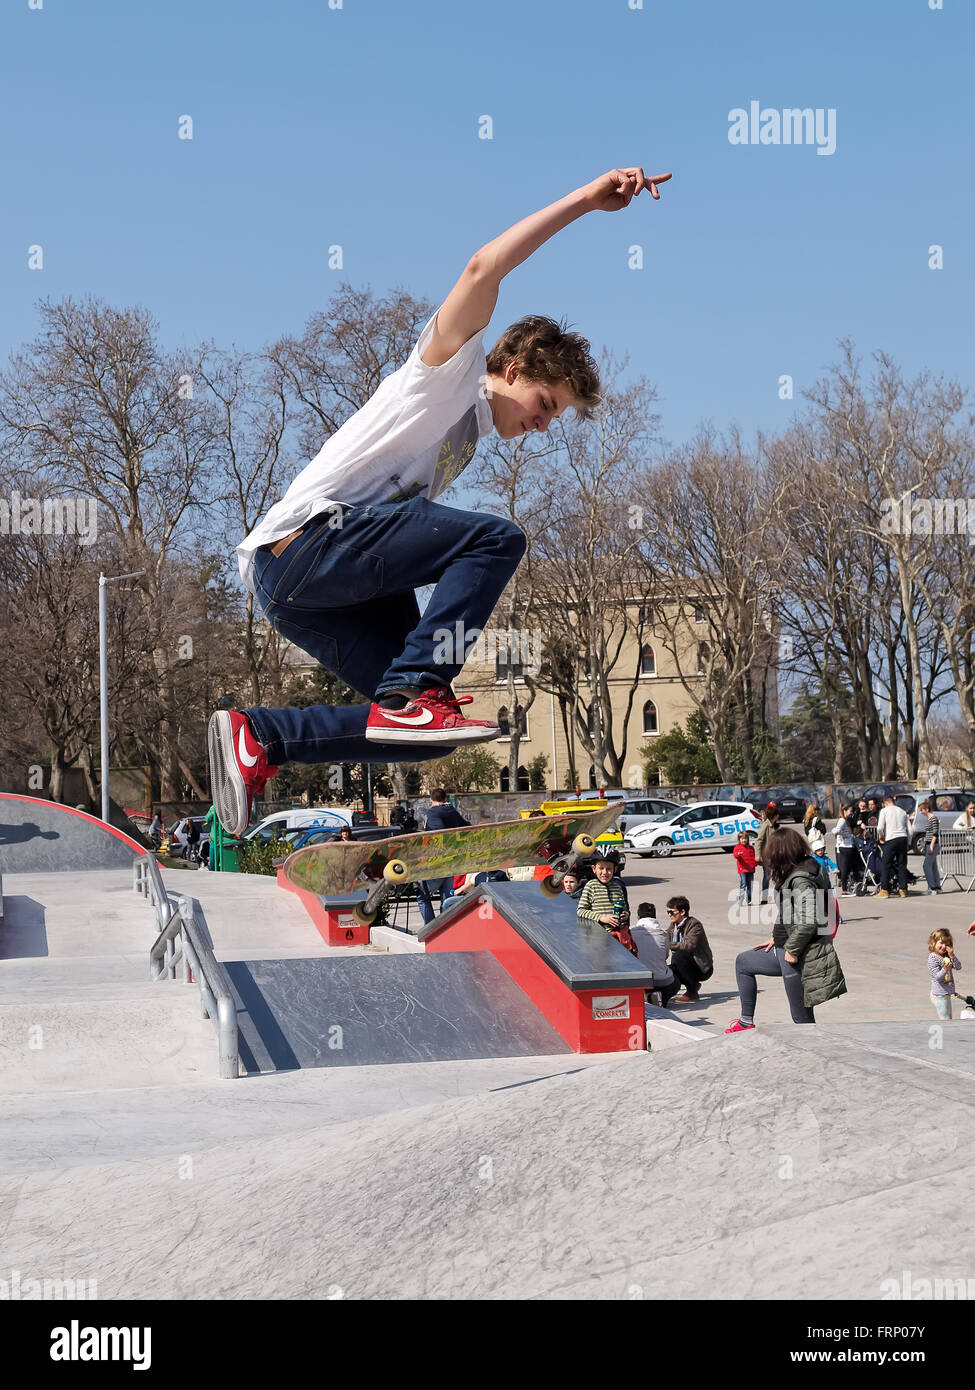 Unidentified skateboarder doing a slide jump during the opening new Skate- park in Pula, Croatia Stock Photo - Alamy